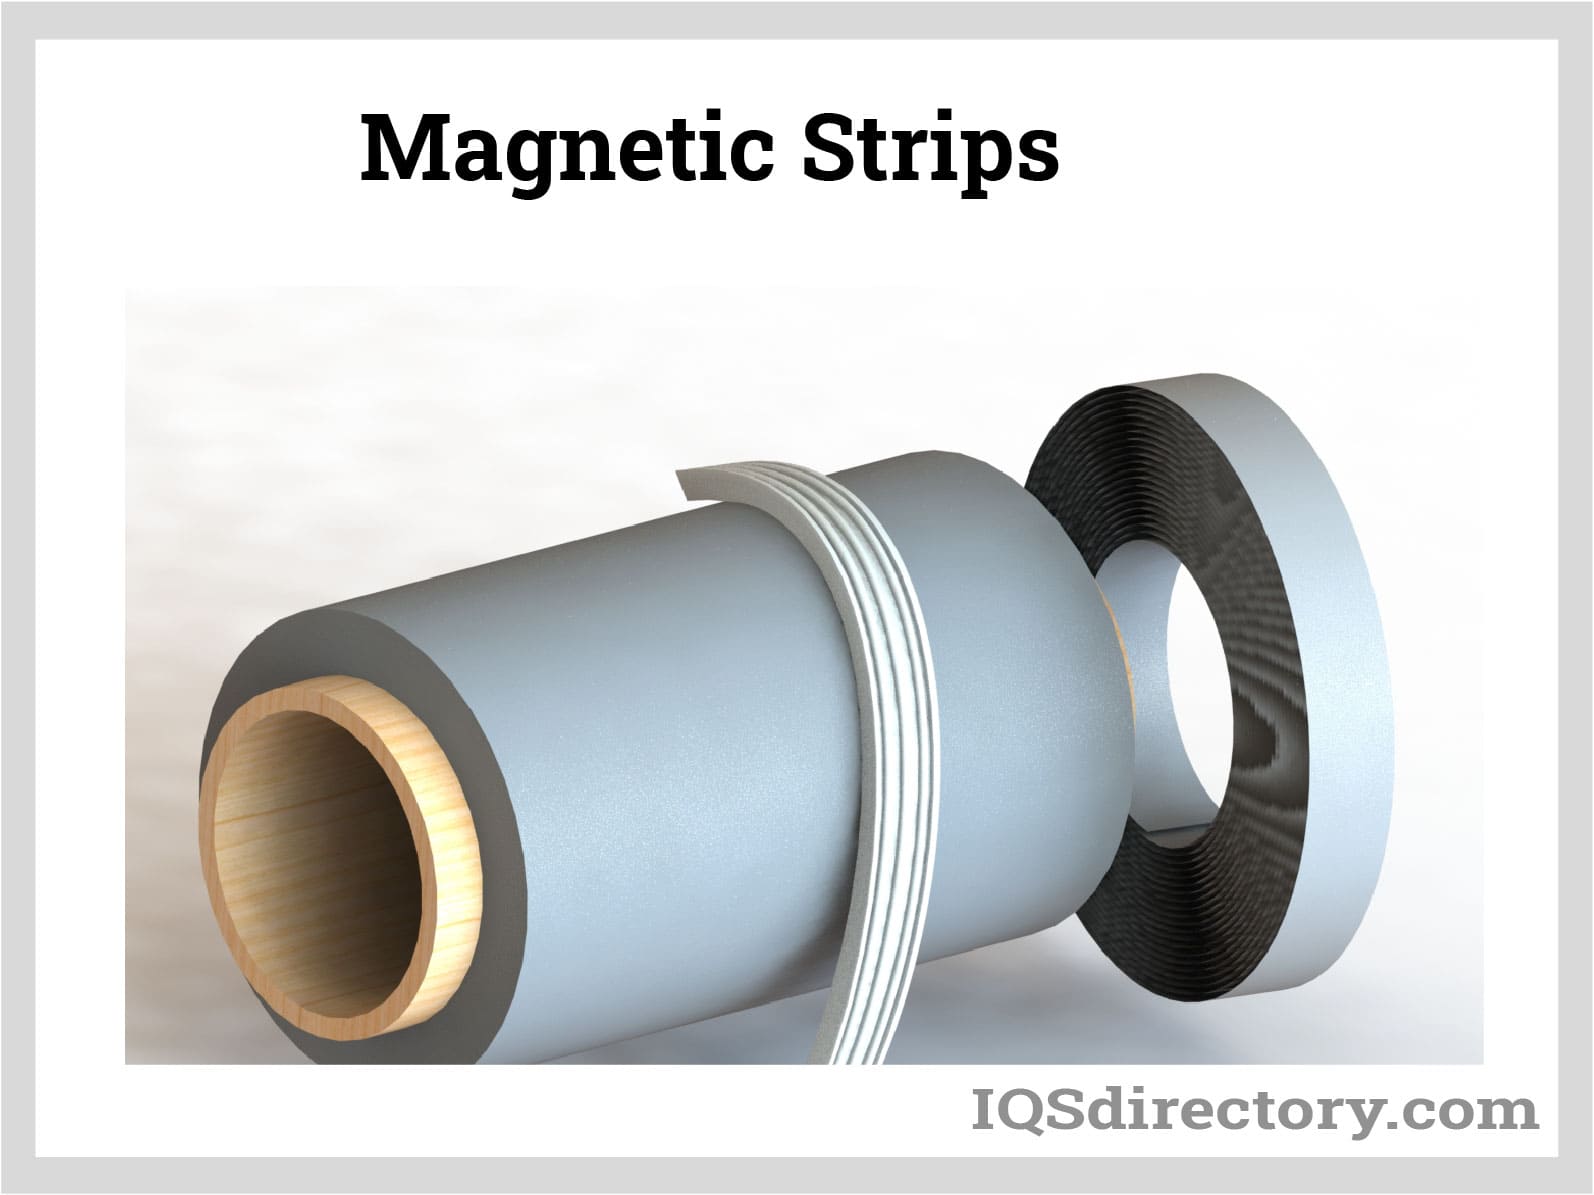 Magnetic Sheet Roll for Crafts, Signs, Display Flexible 24 x 30 Magnet